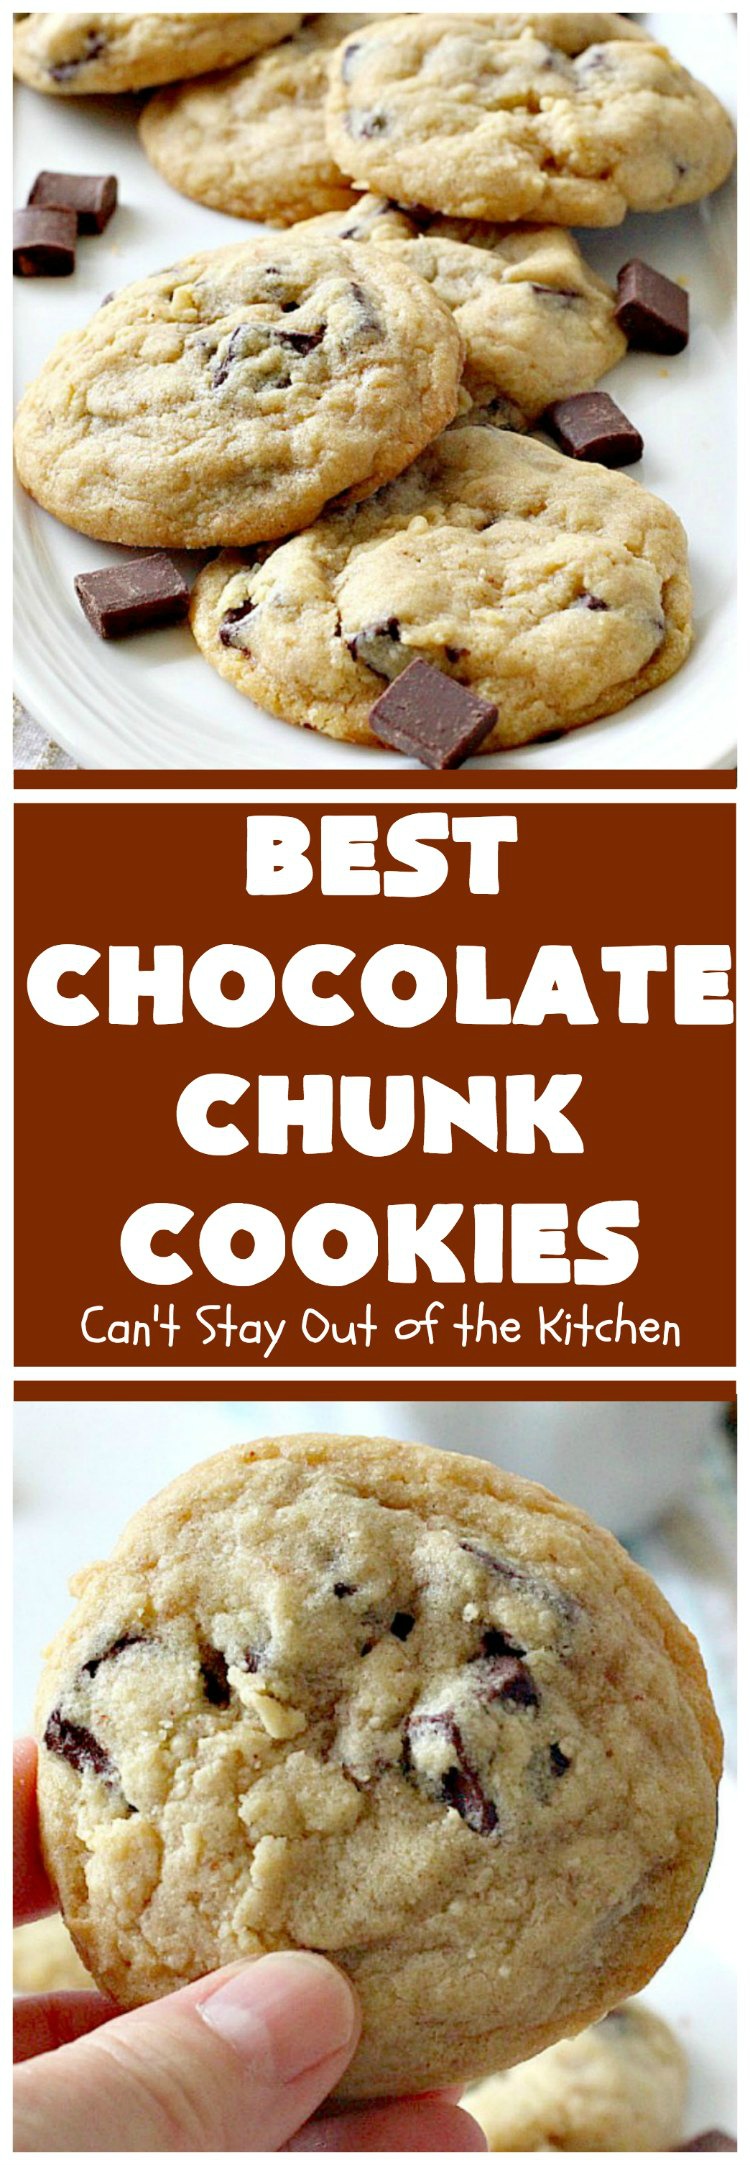 Best Chocolate Chunk Cookies | Can't Stay Out of the Kitchen